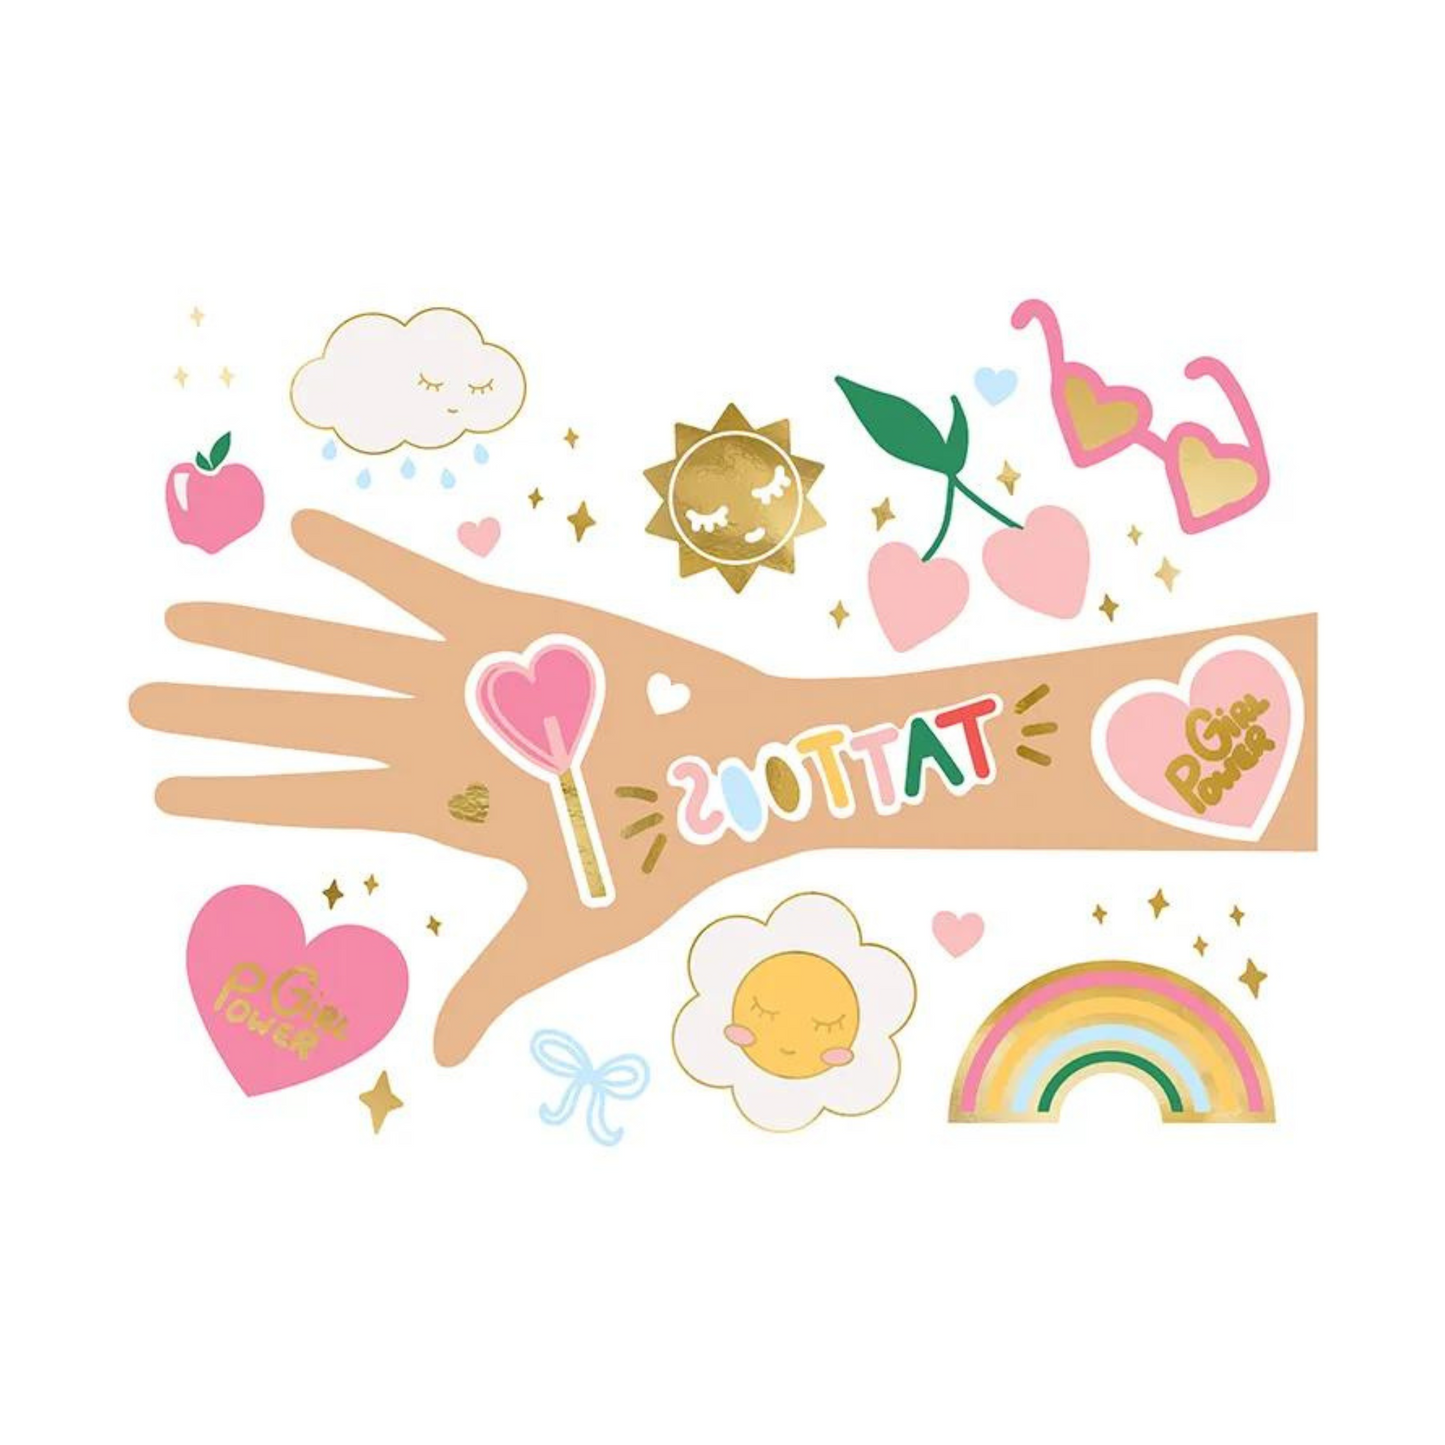 temporary tattoos for kids with heart, rainbow, sun and cloud designs